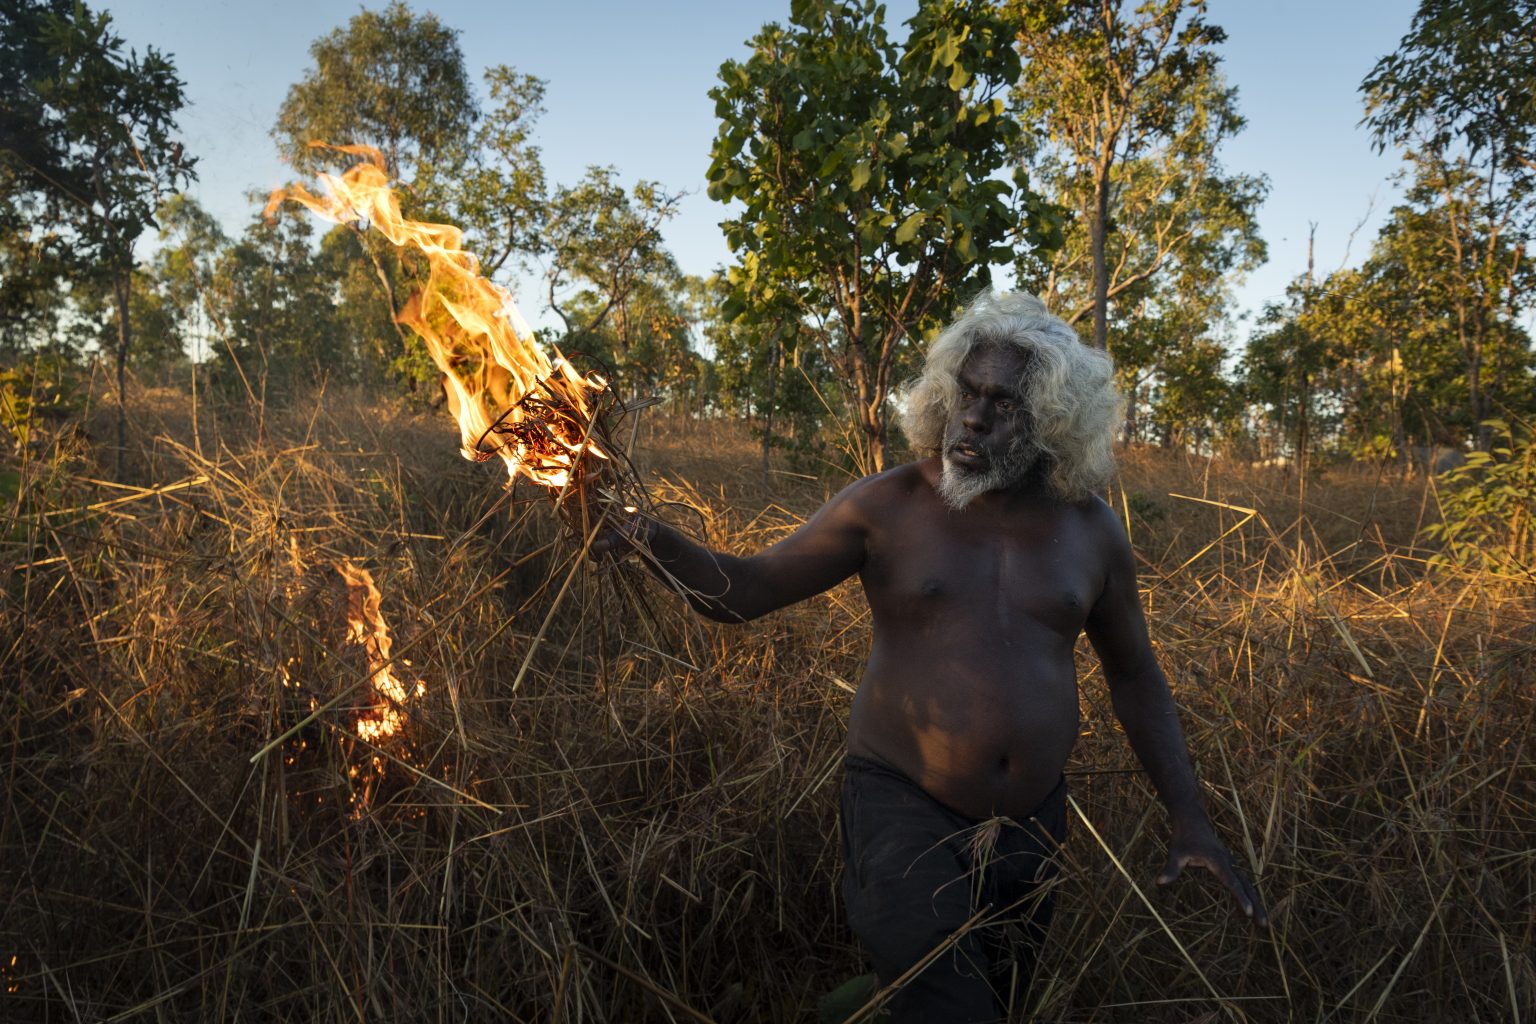 For tens of thousands of years, Aboriginal people - the oldest continuous culture on earth - have been strategically burning the country to manage the landscape and to prevent out of control fires. At the end of the wet season, there's a period of time where this prescribed burning takes place. I visited West Arnhem Land in April/May 2021 and witnessed prescribed aerial and ground burning.